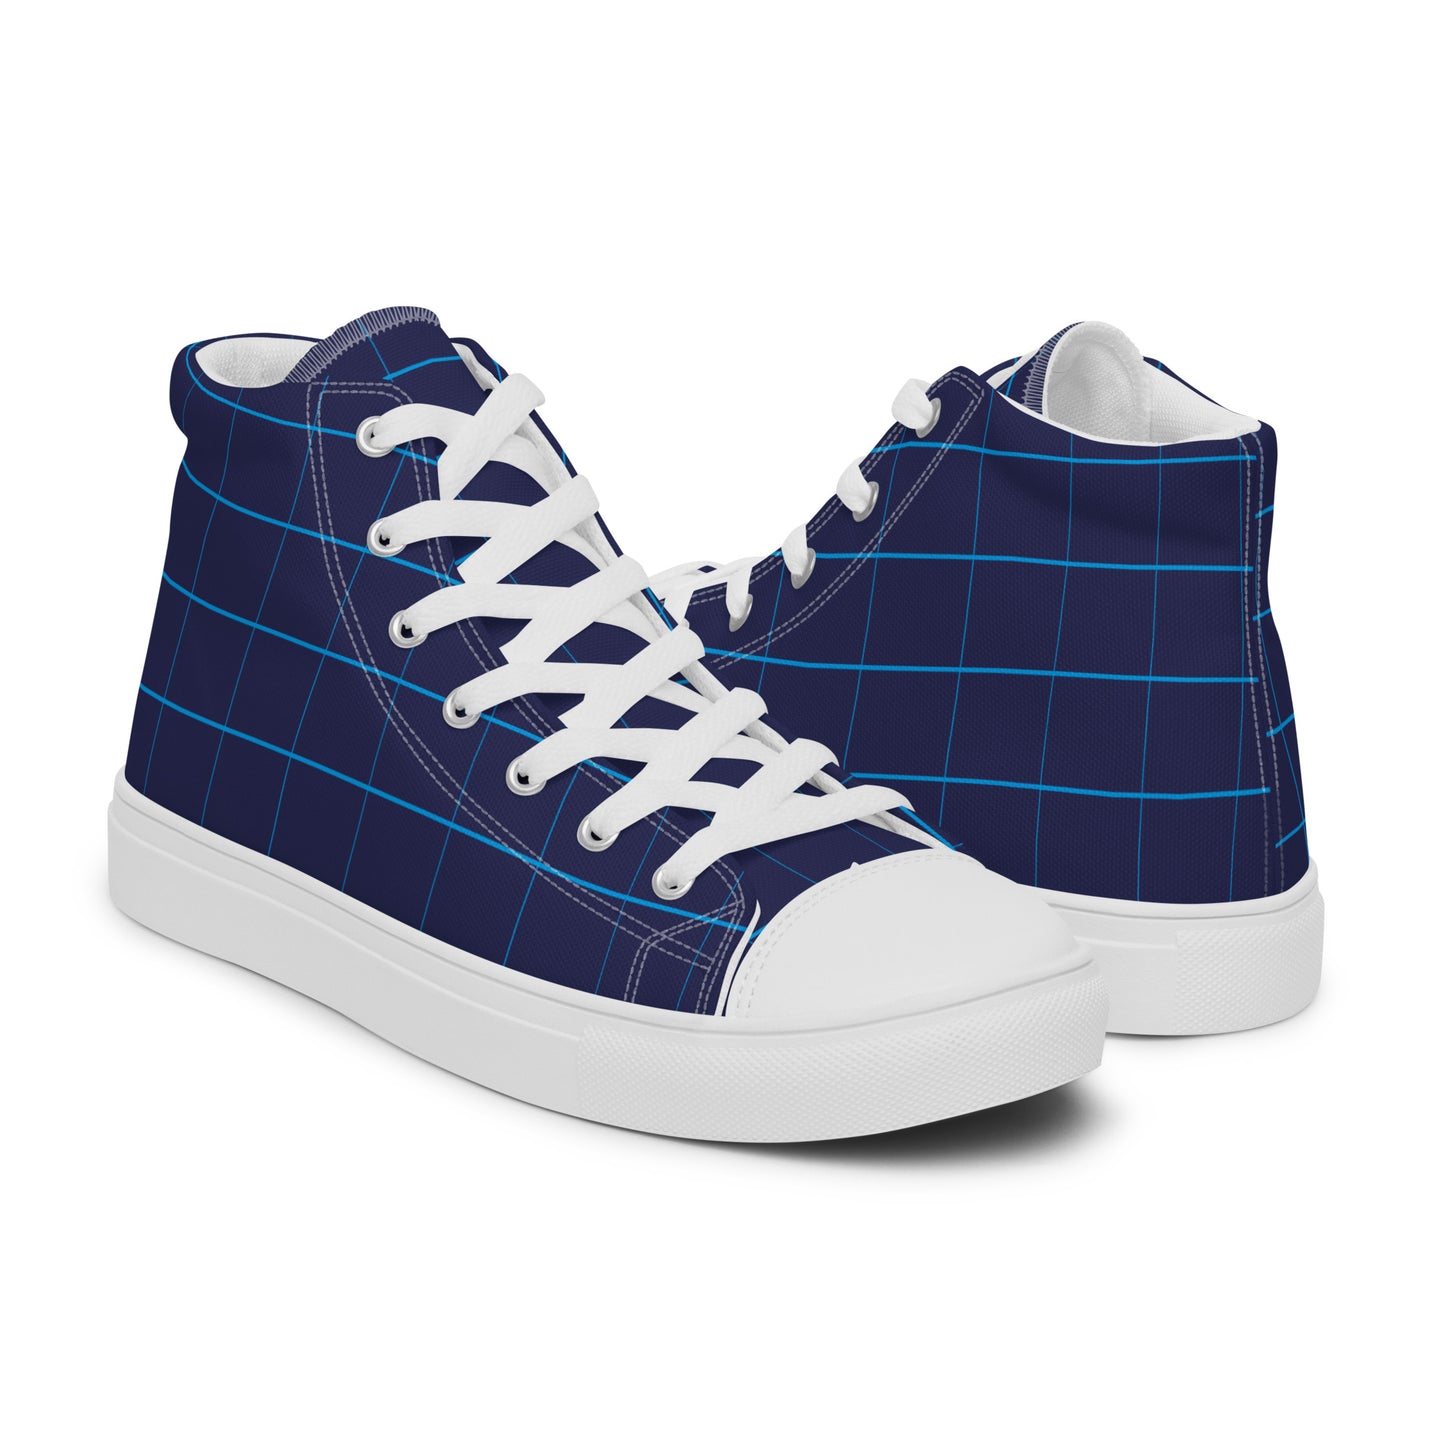 Grid Dimension - Sustainably Made Men's High Top Canvas Shoes